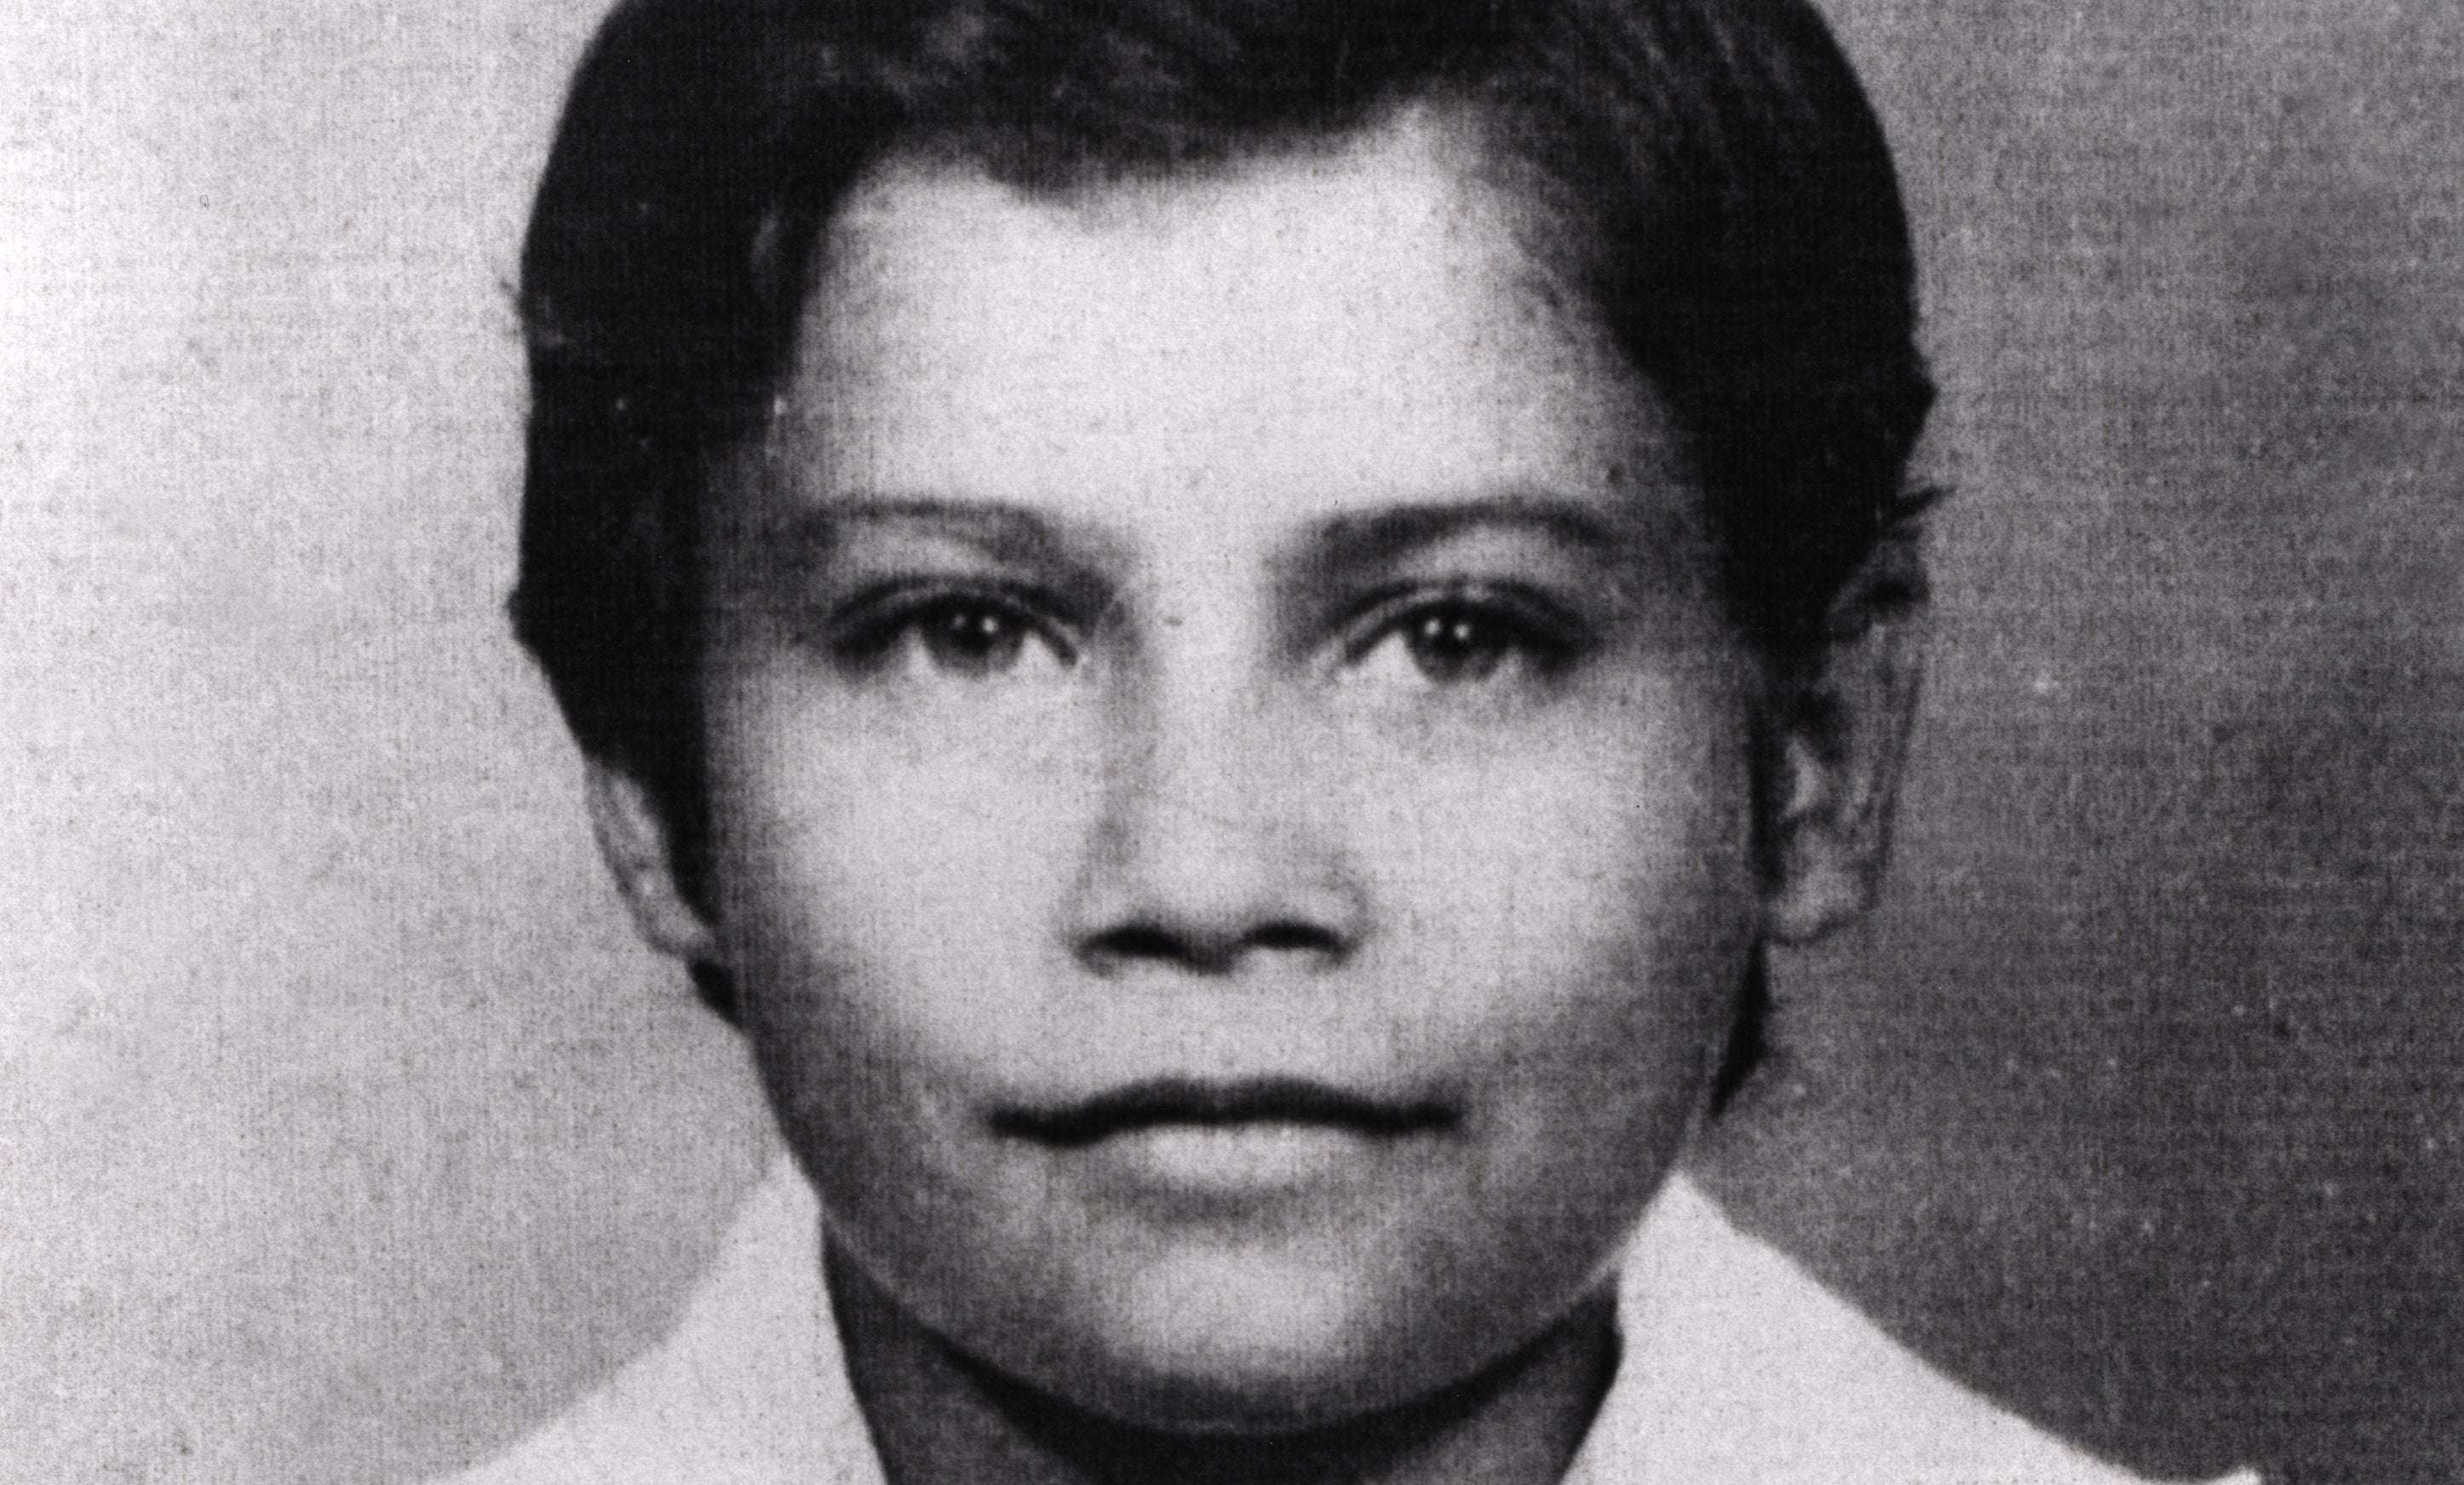 image for TIL a Guatemalan boy saw soldiers come into his village and murder his parents along with the rest of the village, was adopted and raised in an abusive household by one of the men who massacred the villagers, and later gave testimony that sent the killer to prison with a 6,000 year sentence